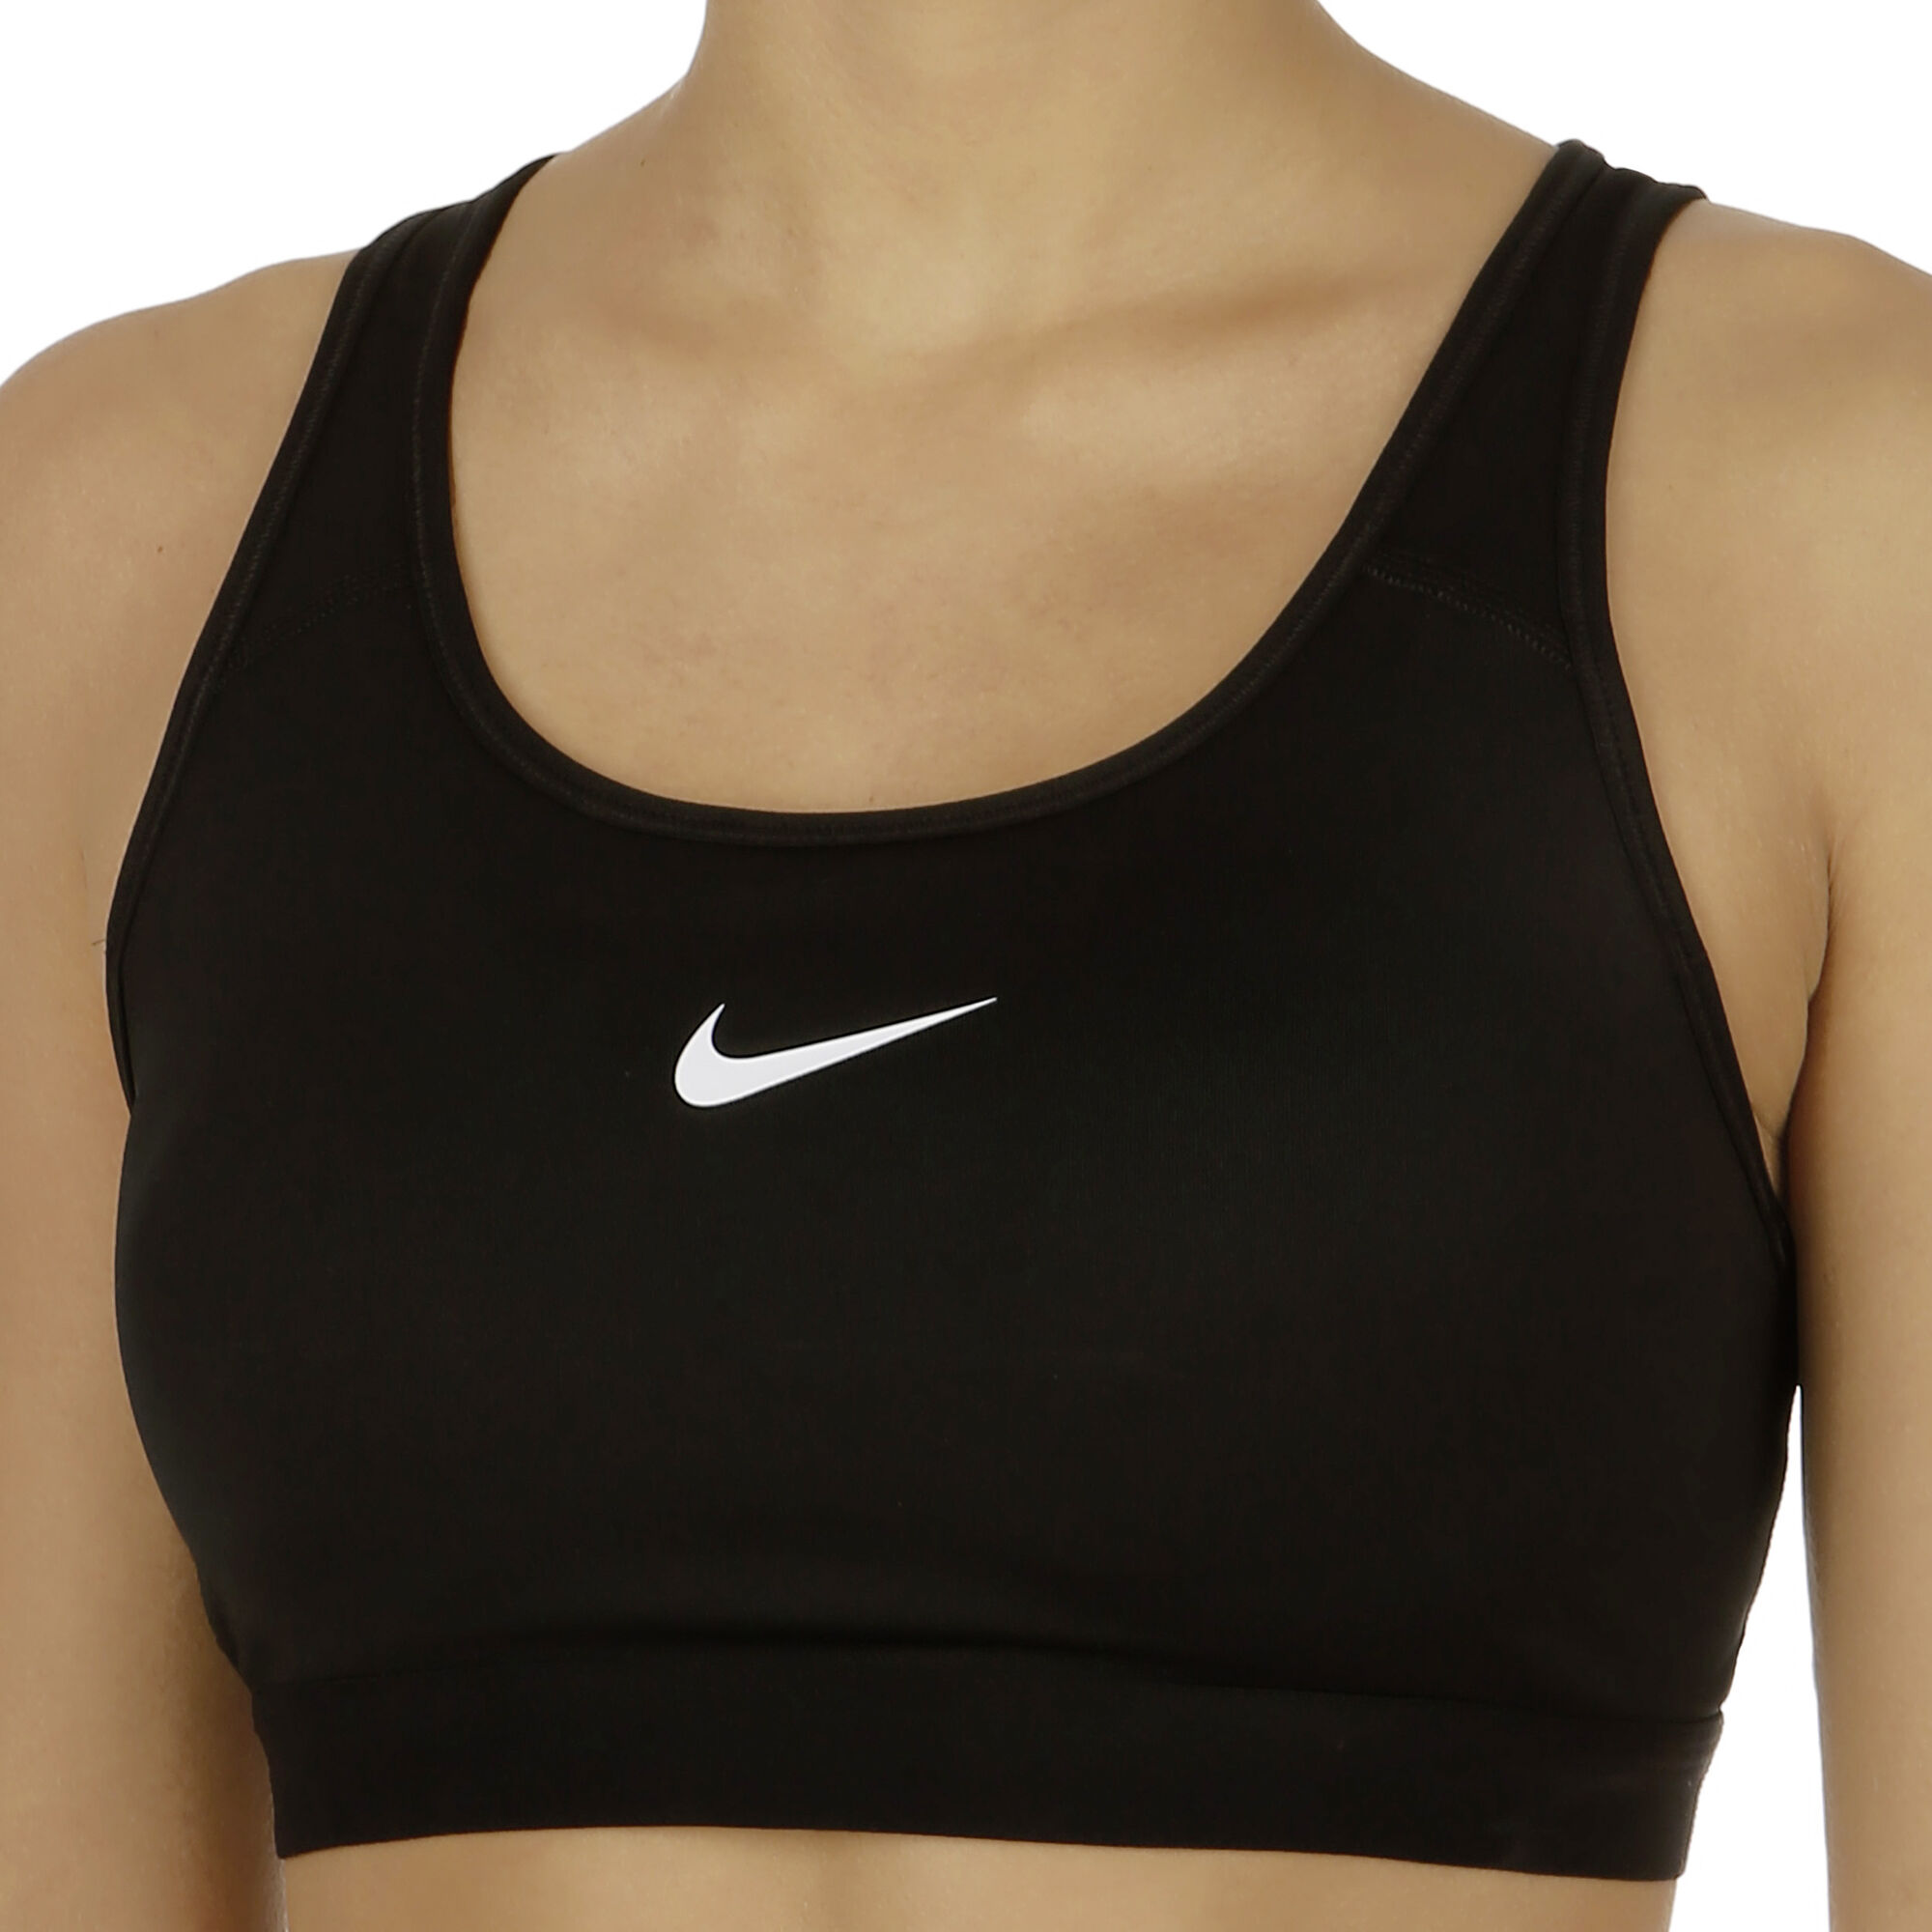 Nathaniel Ward cortar Reprimir Nike Pro Dry Fit Classic Padded Sujetador Deportivo Mujeres - Negro, Blanco  compra online | Tennis-Point